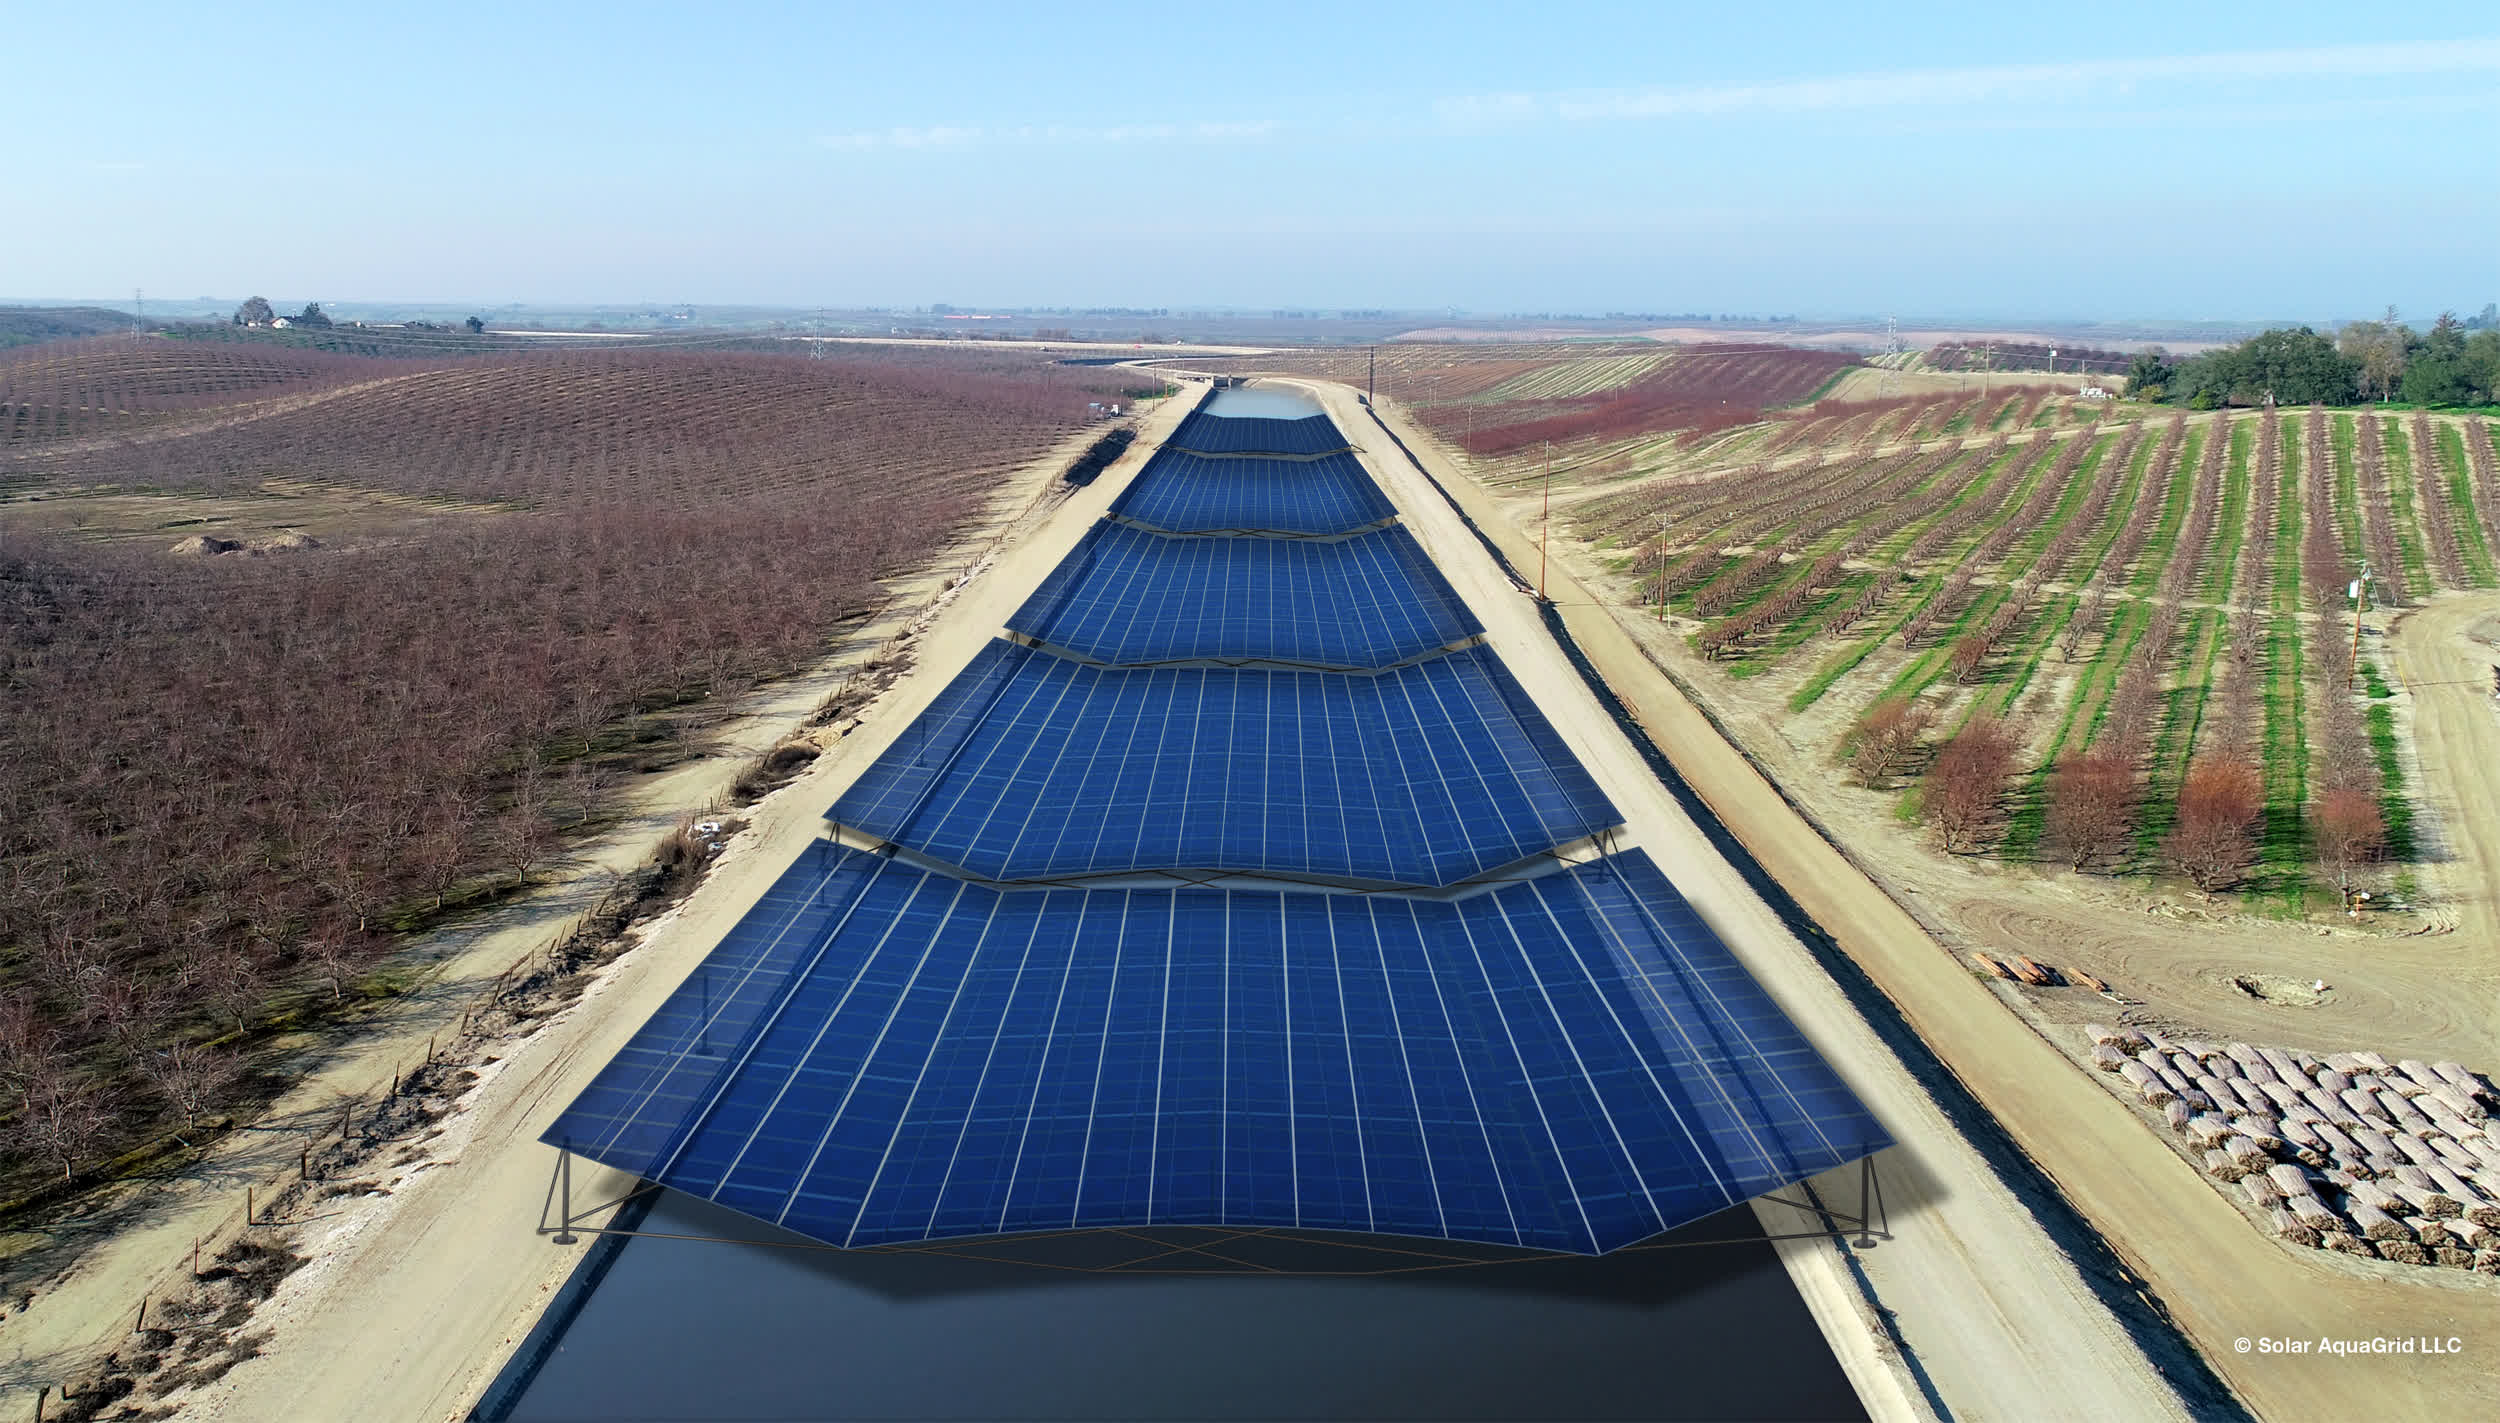 California is spending $20M to install solar panels over 1.6 miles of canals